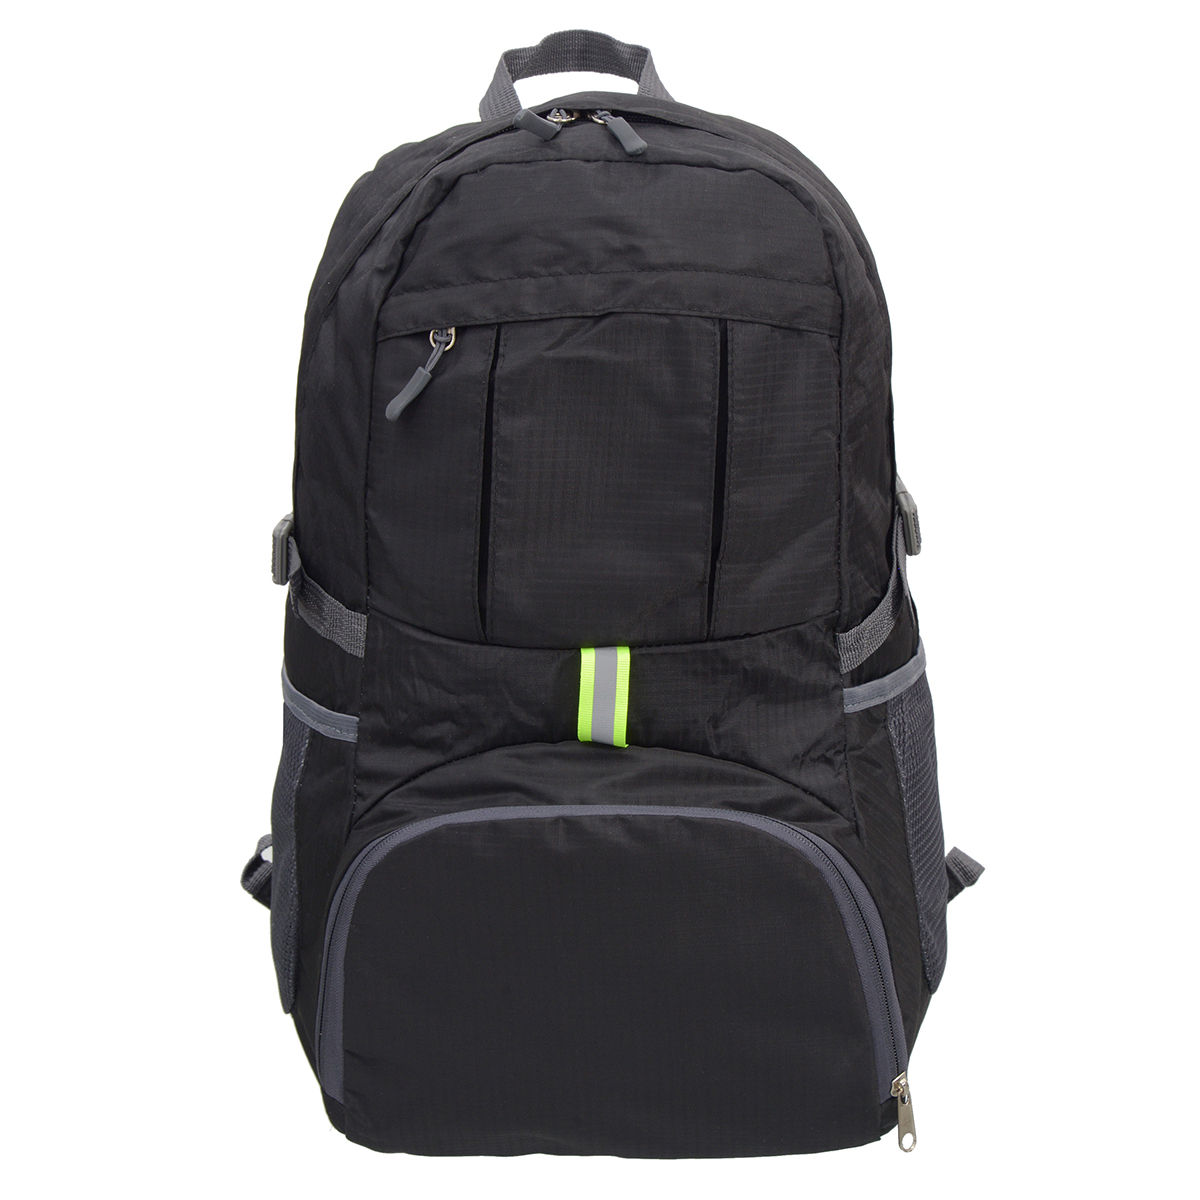 NICCI Packable Backpack